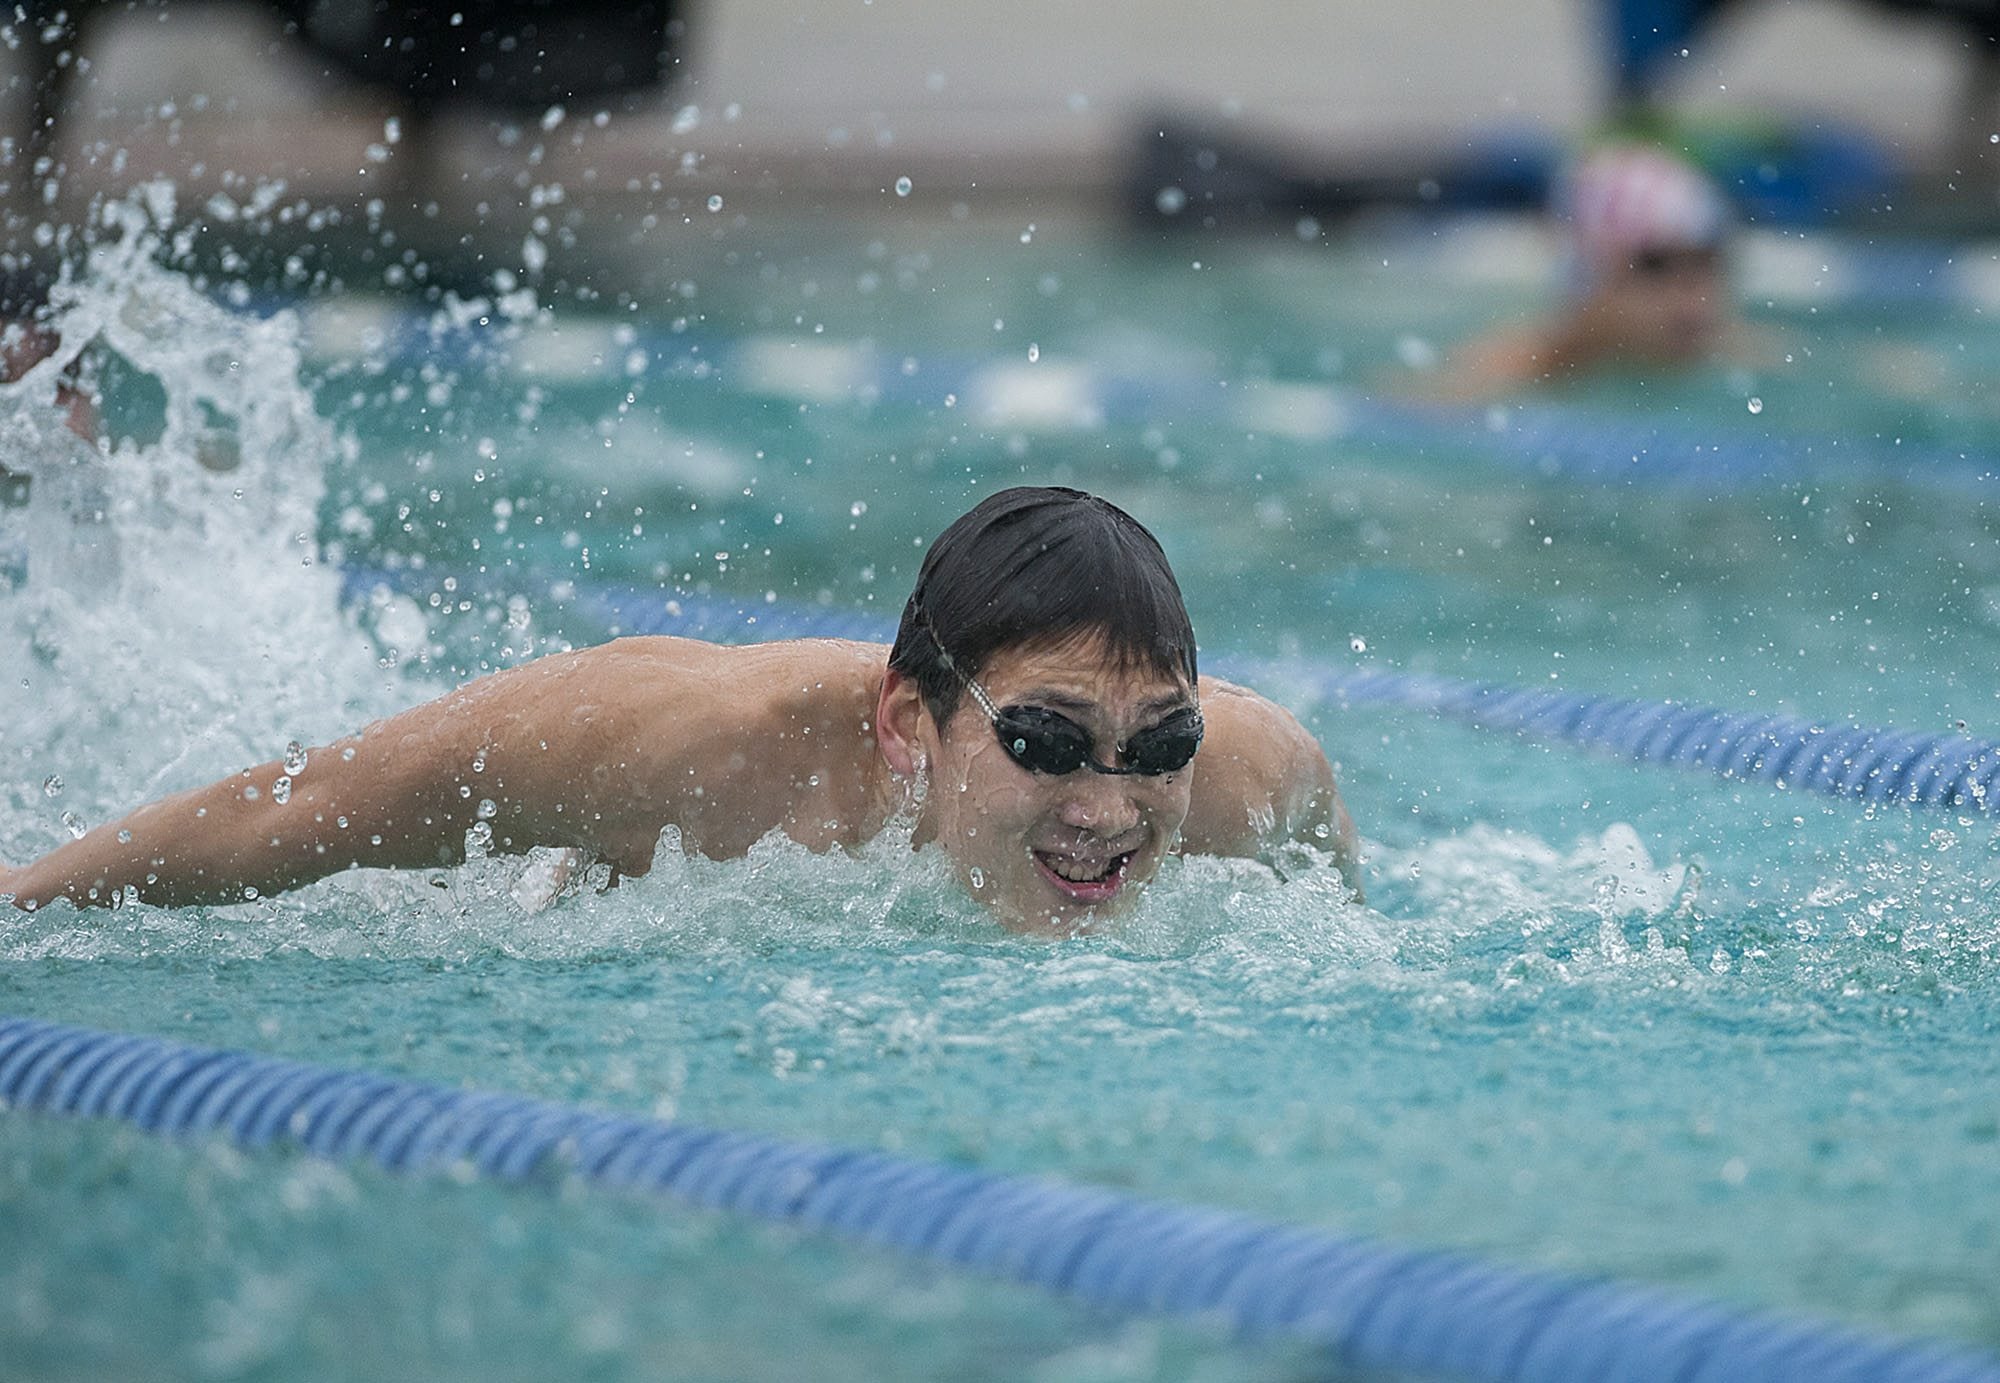 After joining the Camas swim team with a nudge from a senior, Mark Kim has his sights on a possible state title in the 500 freestyle.